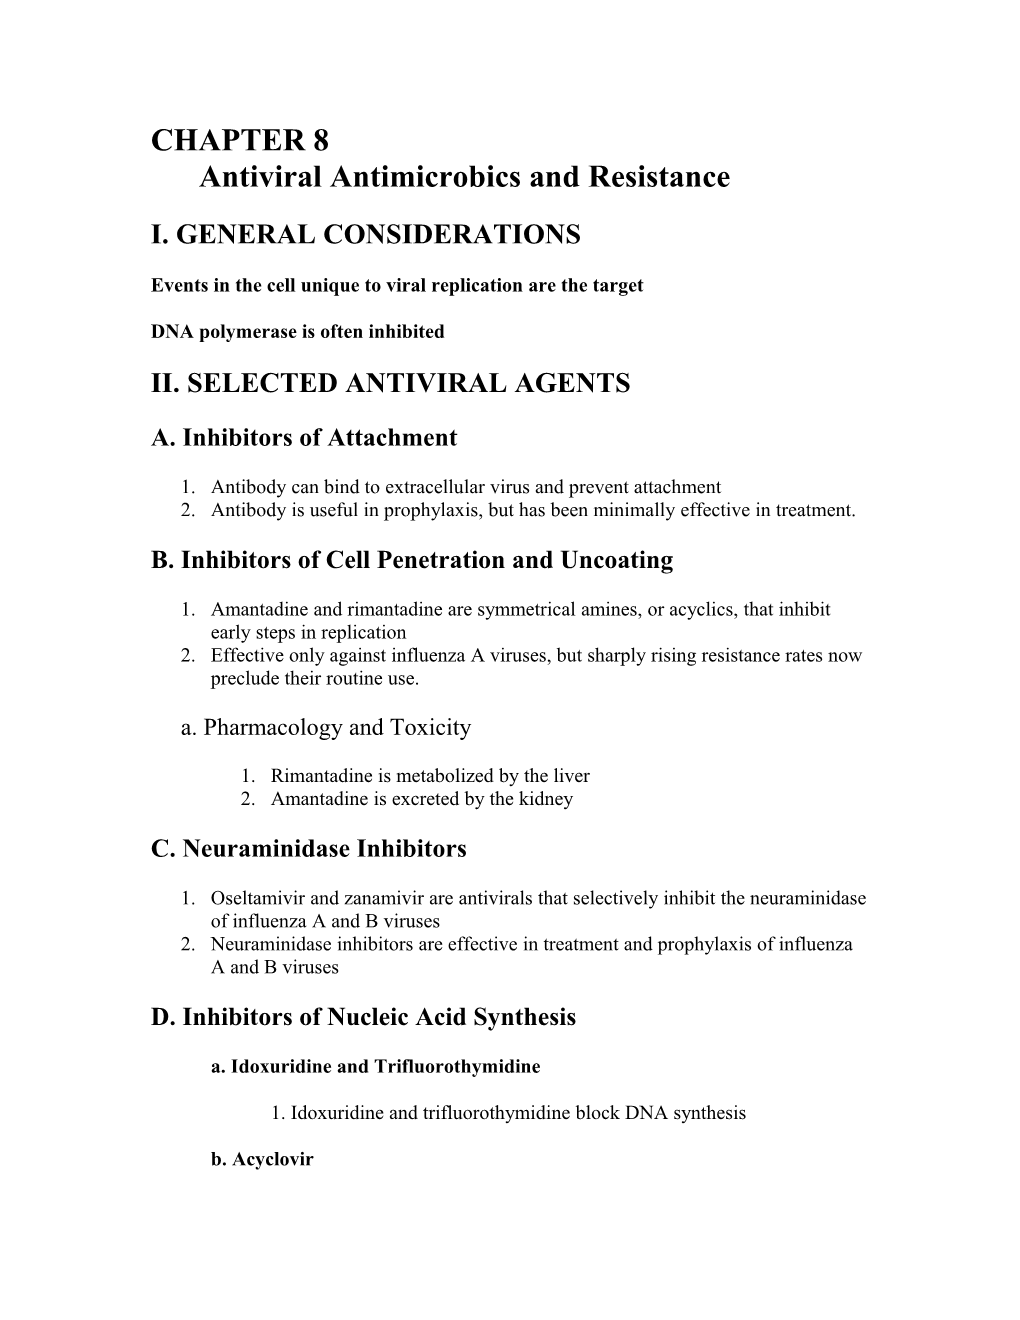 CHAPTER 8Antiviral Antimicrobics and Resistance